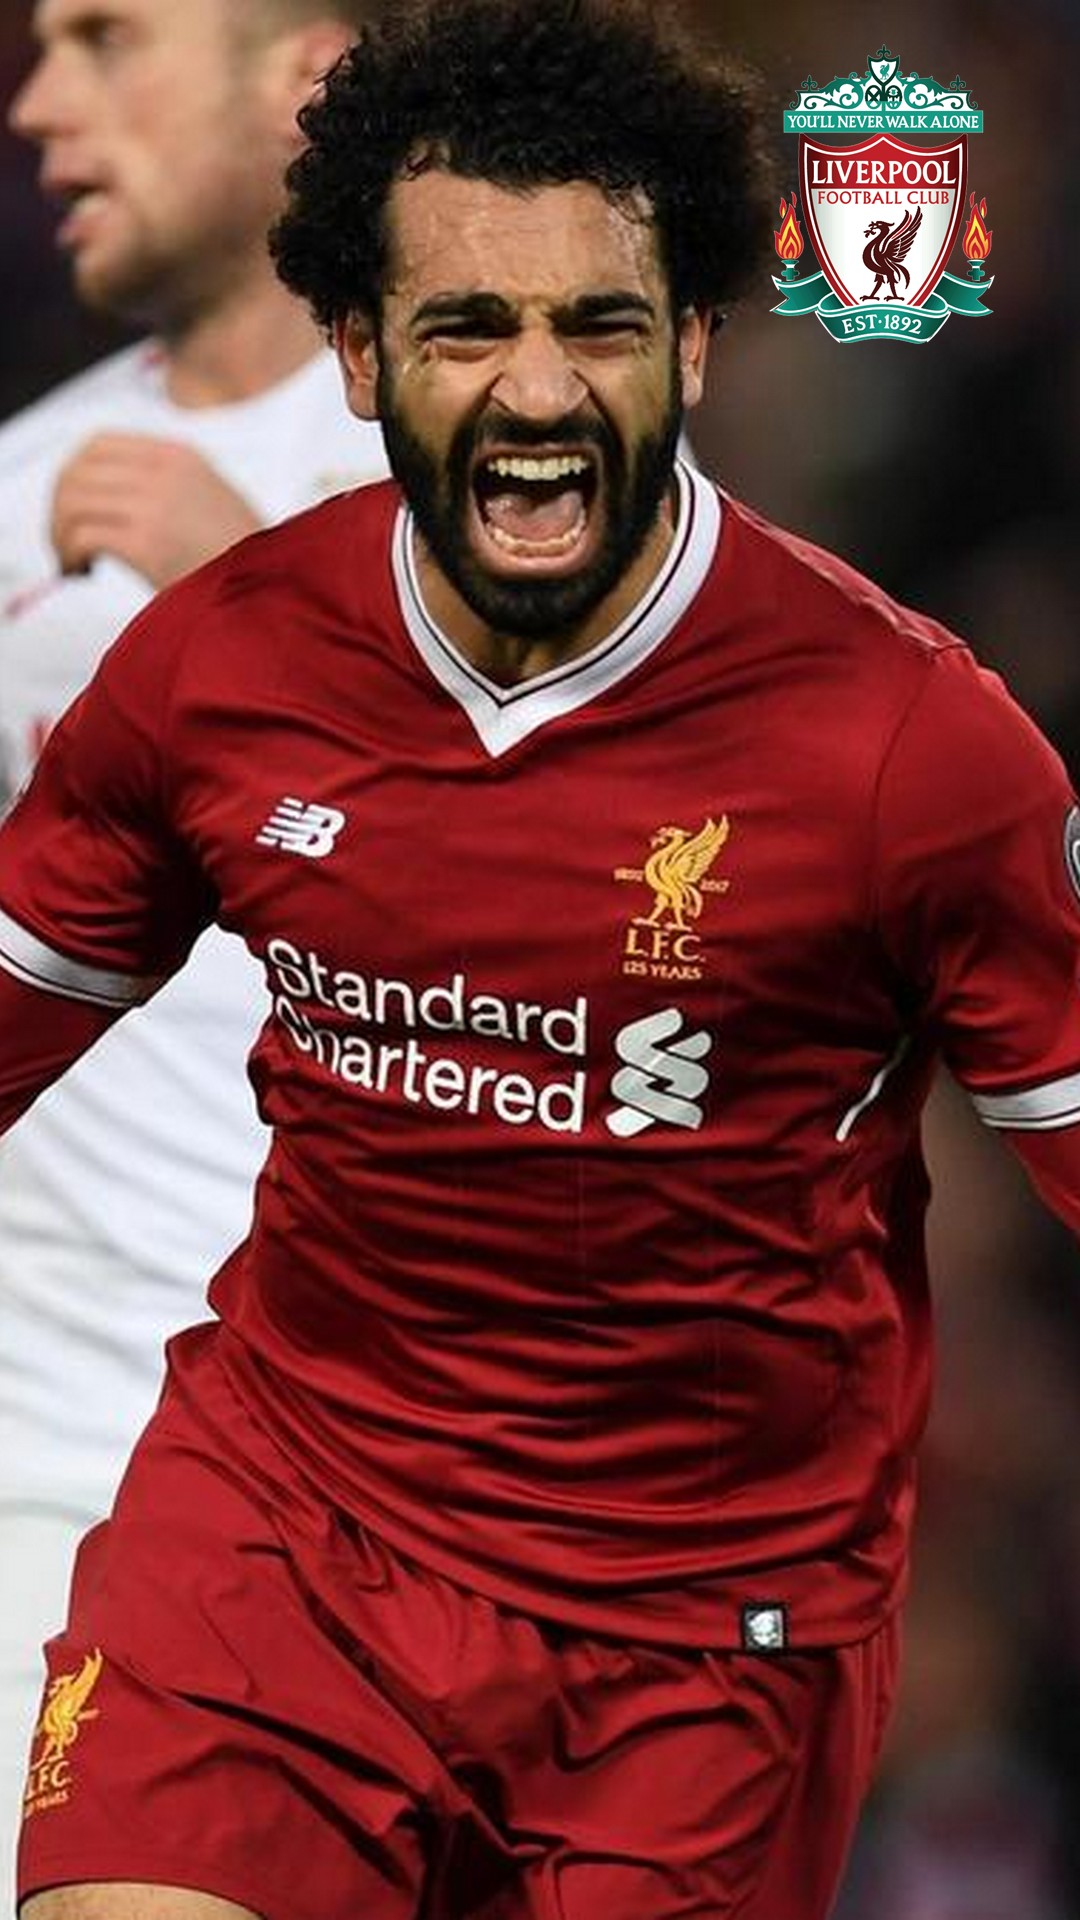 Liverpool Mohamed Salah Wallpaper For Android with image resolution 1080x1920 pixel. You can make this wallpaper for your Android backgrounds, Tablet, Smartphones Screensavers and Mobile Phone Lock Screen